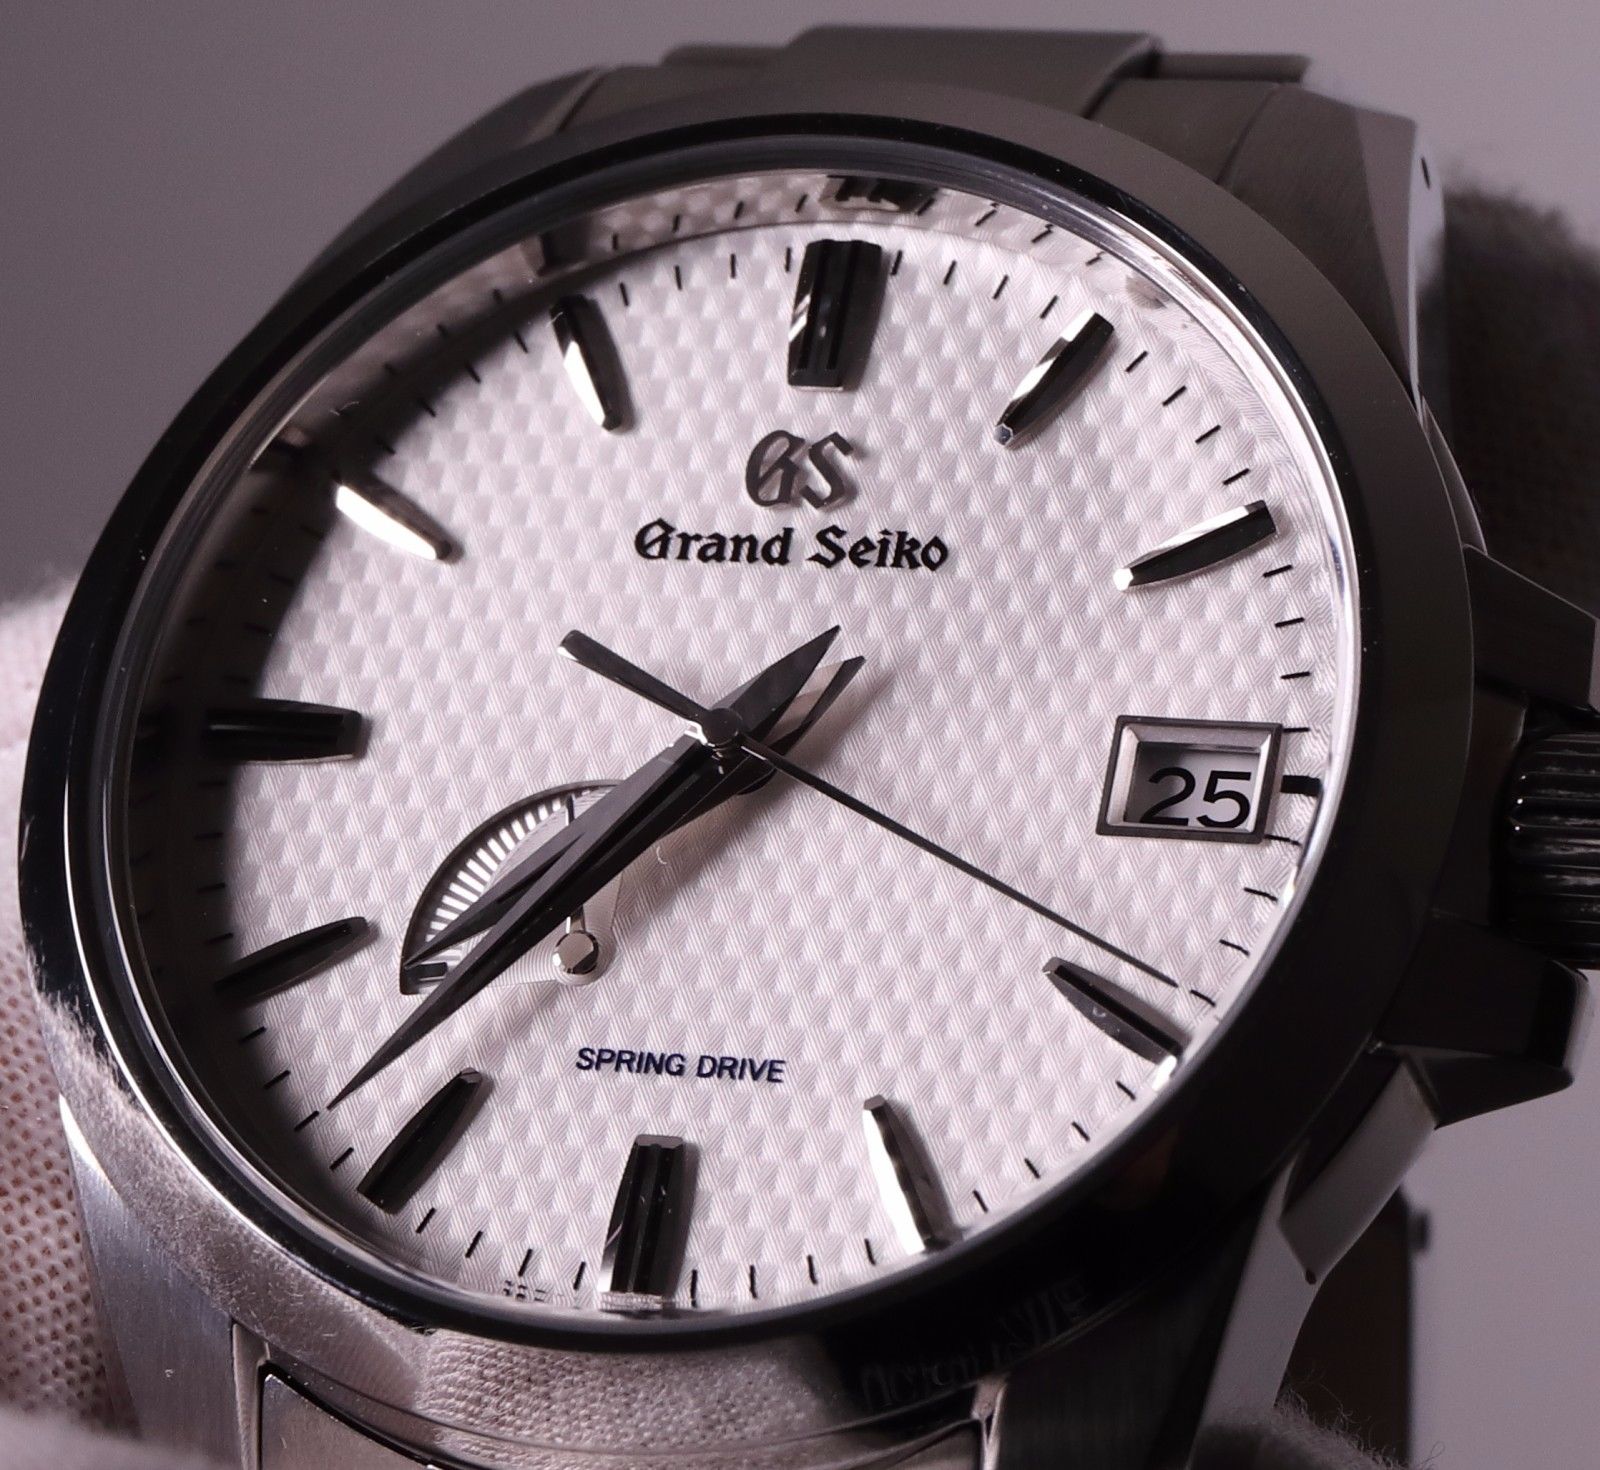 Grand Seiko SBGA225 - Boutique-only Limited Edition - Spring Drive |  WatchUSeek Watch Forums